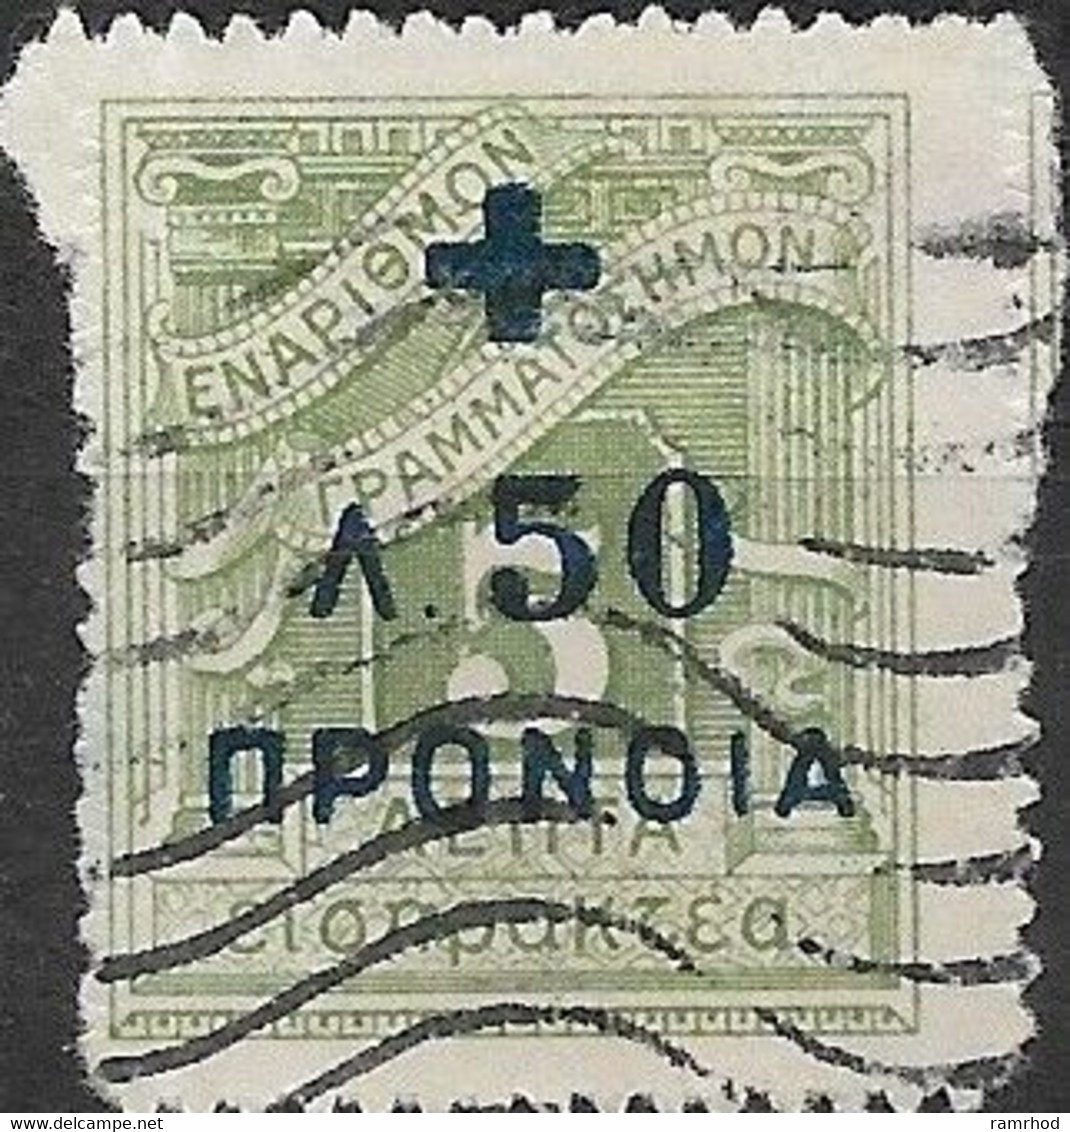 GREECE 1938 Charity Tax - Postage Due Surcharged - 50l. On 5l. - Green FU - Bienfaisance